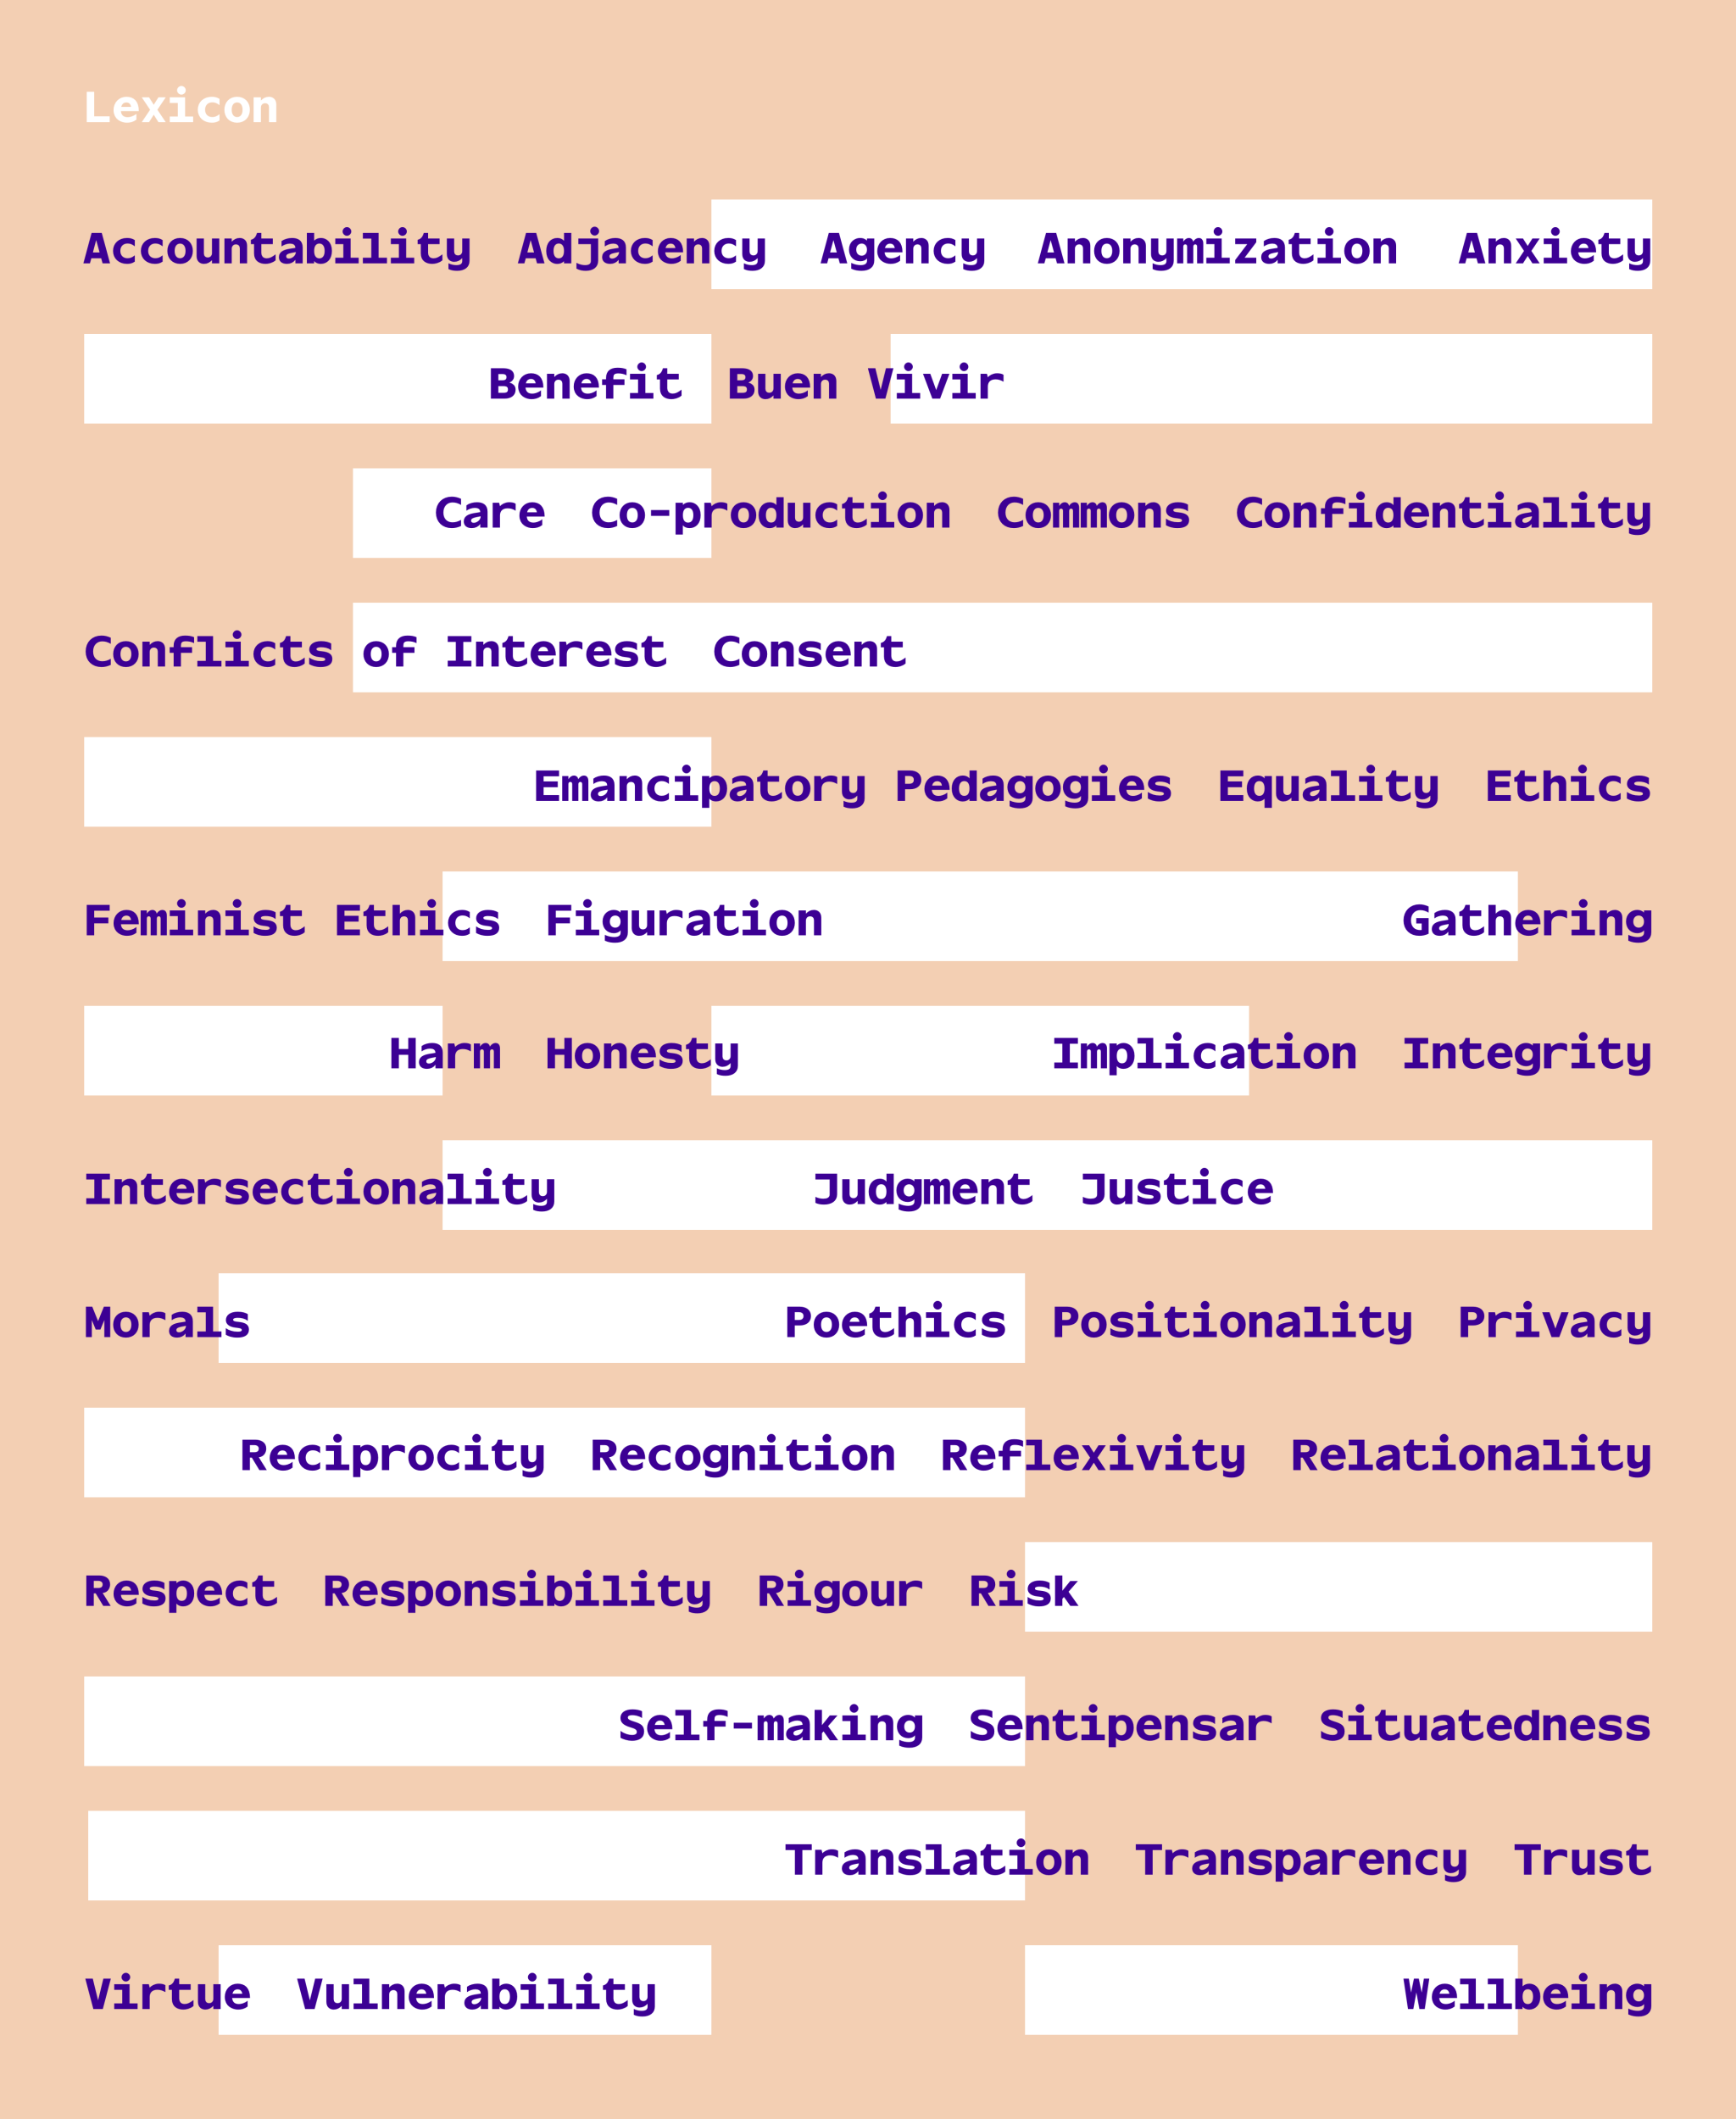 Accountability, Adjacency, Agency, Anonymization, Anxiety, Benefit, Buen Vivir, Care, Co-production, Commons, Confidentiality, Conflicts of Interest, Consent, Emancipatory Pedagogies, Equality, Ethics, Feminist Ethics, Figuration, Gathering, Harm, Honesty, Implication, Integrity, Intersectionality, Judgement, Justice, Morals, Poethics, Positionality, Privacy, Reciprocity, Recognitions, Reflexivity, Rigour, Risk, Self-making, Sentipensar, Situatedness, Translation, Transparency, Trust, Virtue, Vulnerability, Wellbeing